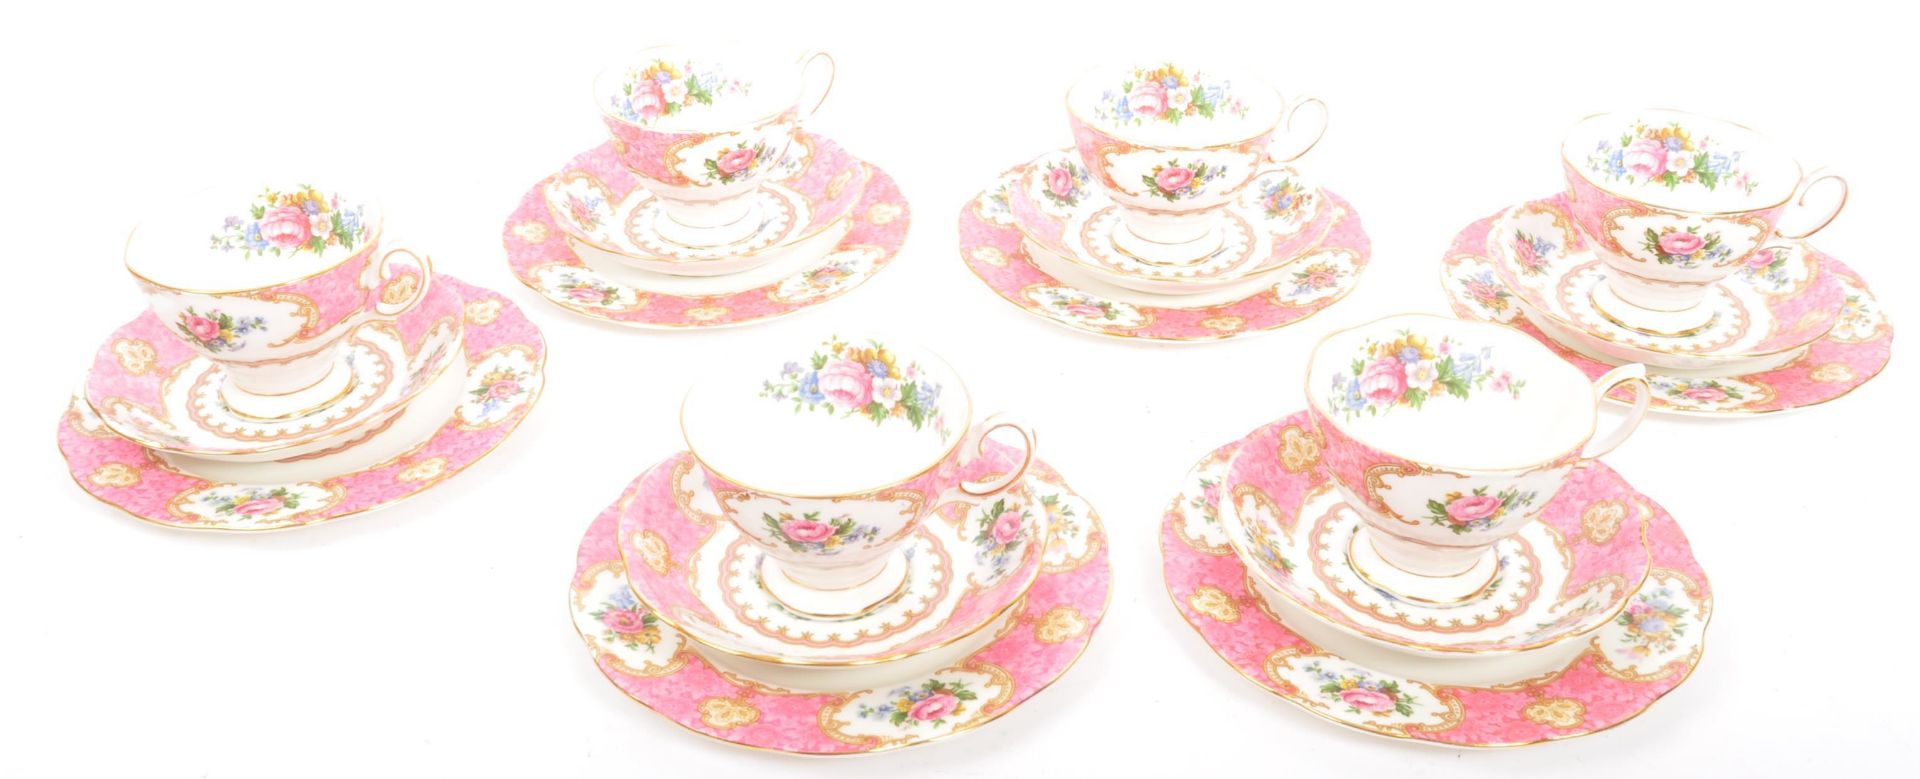 A 20TH CENTURY ROYAL ALBERT LADY CARLYLE TEA SERVICE SET - Image 4 of 6